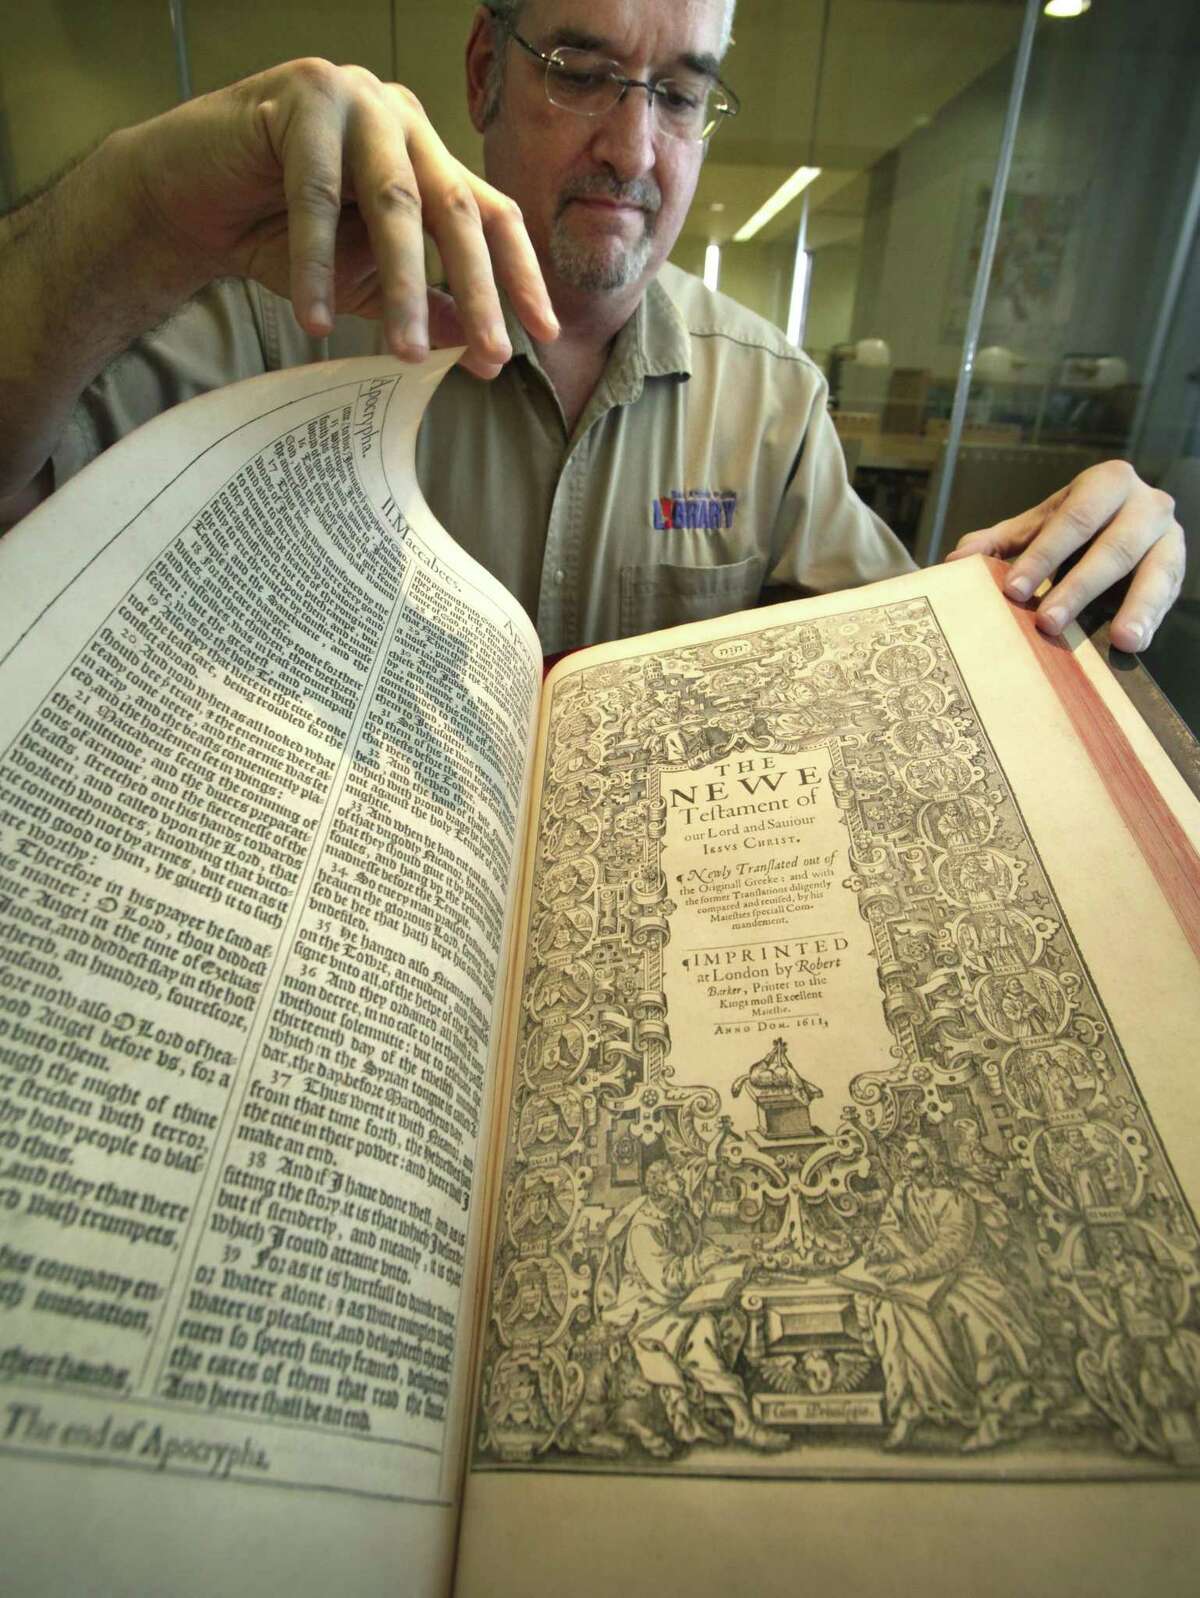 Matt DeWaelsche, assistant manager and archivist at San Antonio’s Central Library, turns the page on the first-edition 1611 King James Bible, which was part of the library's collection in 2011, when it turned 400 years old.